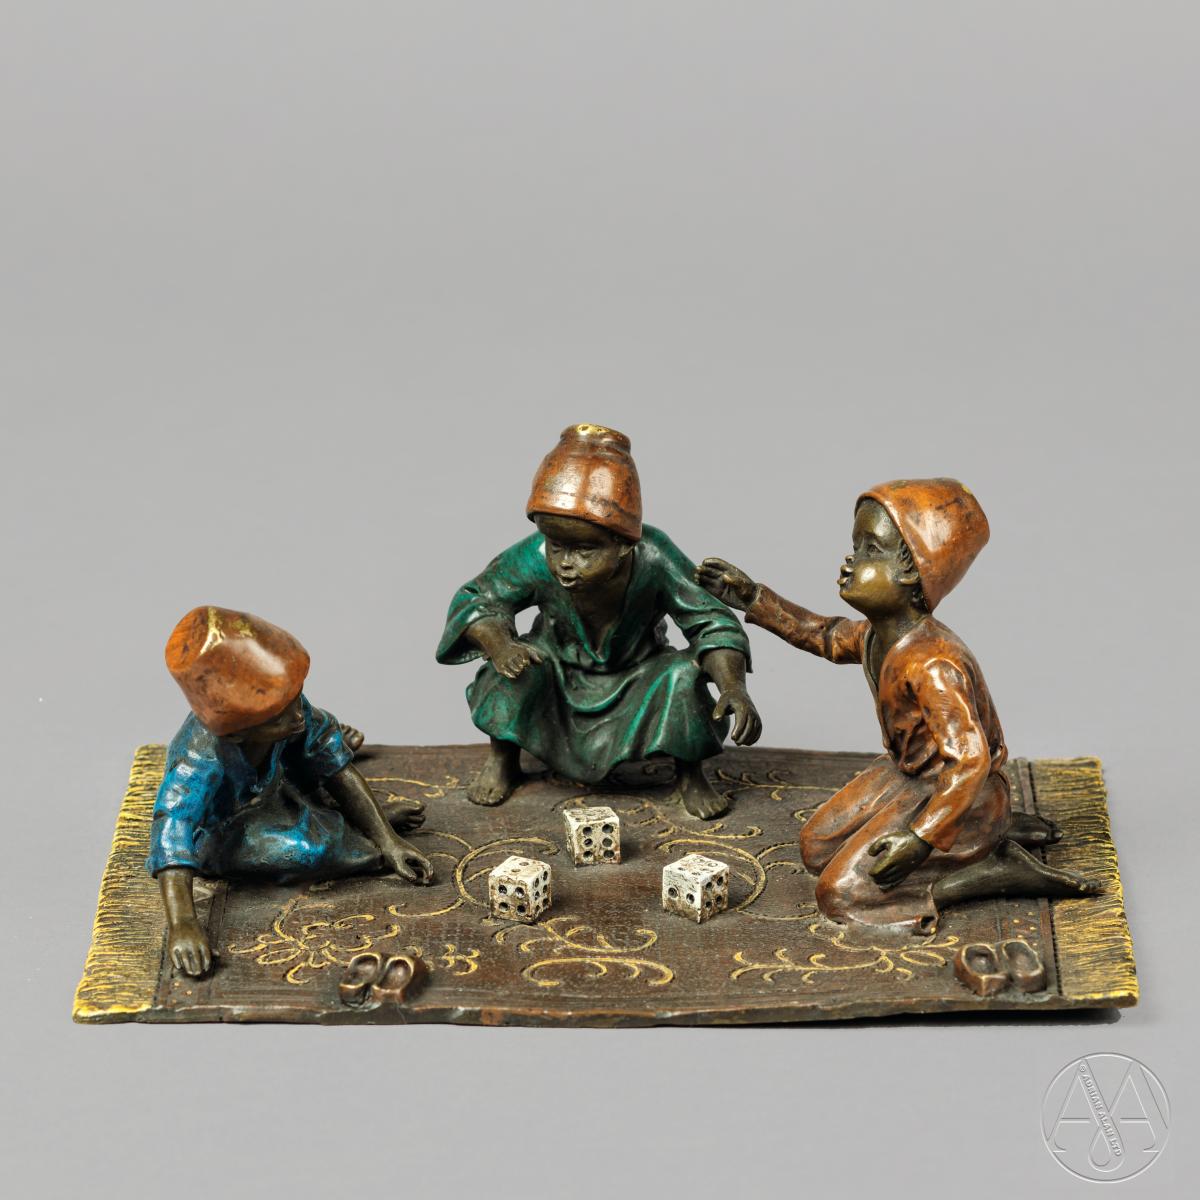 'The Dice Players' - A Fine Cold Painted Orientalist Bronze by Franz Bergman